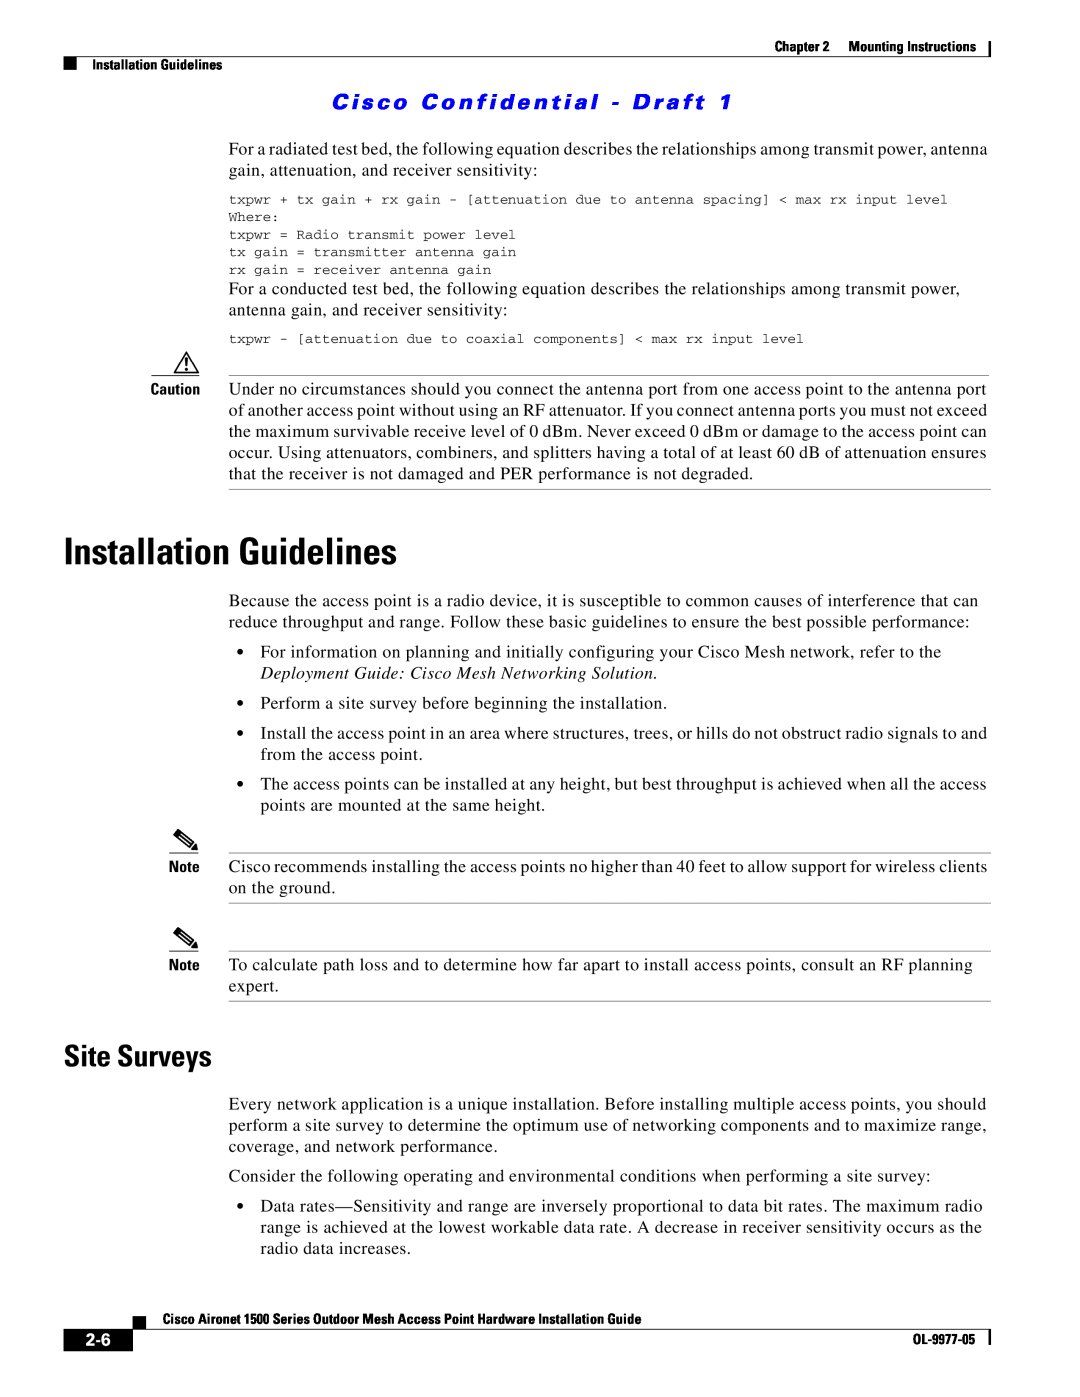 Cisco Systems 1500 Series manual Installation Guidelines, Site Surveys, C i s c o C o n f i d e n t i a l - D r a ft 